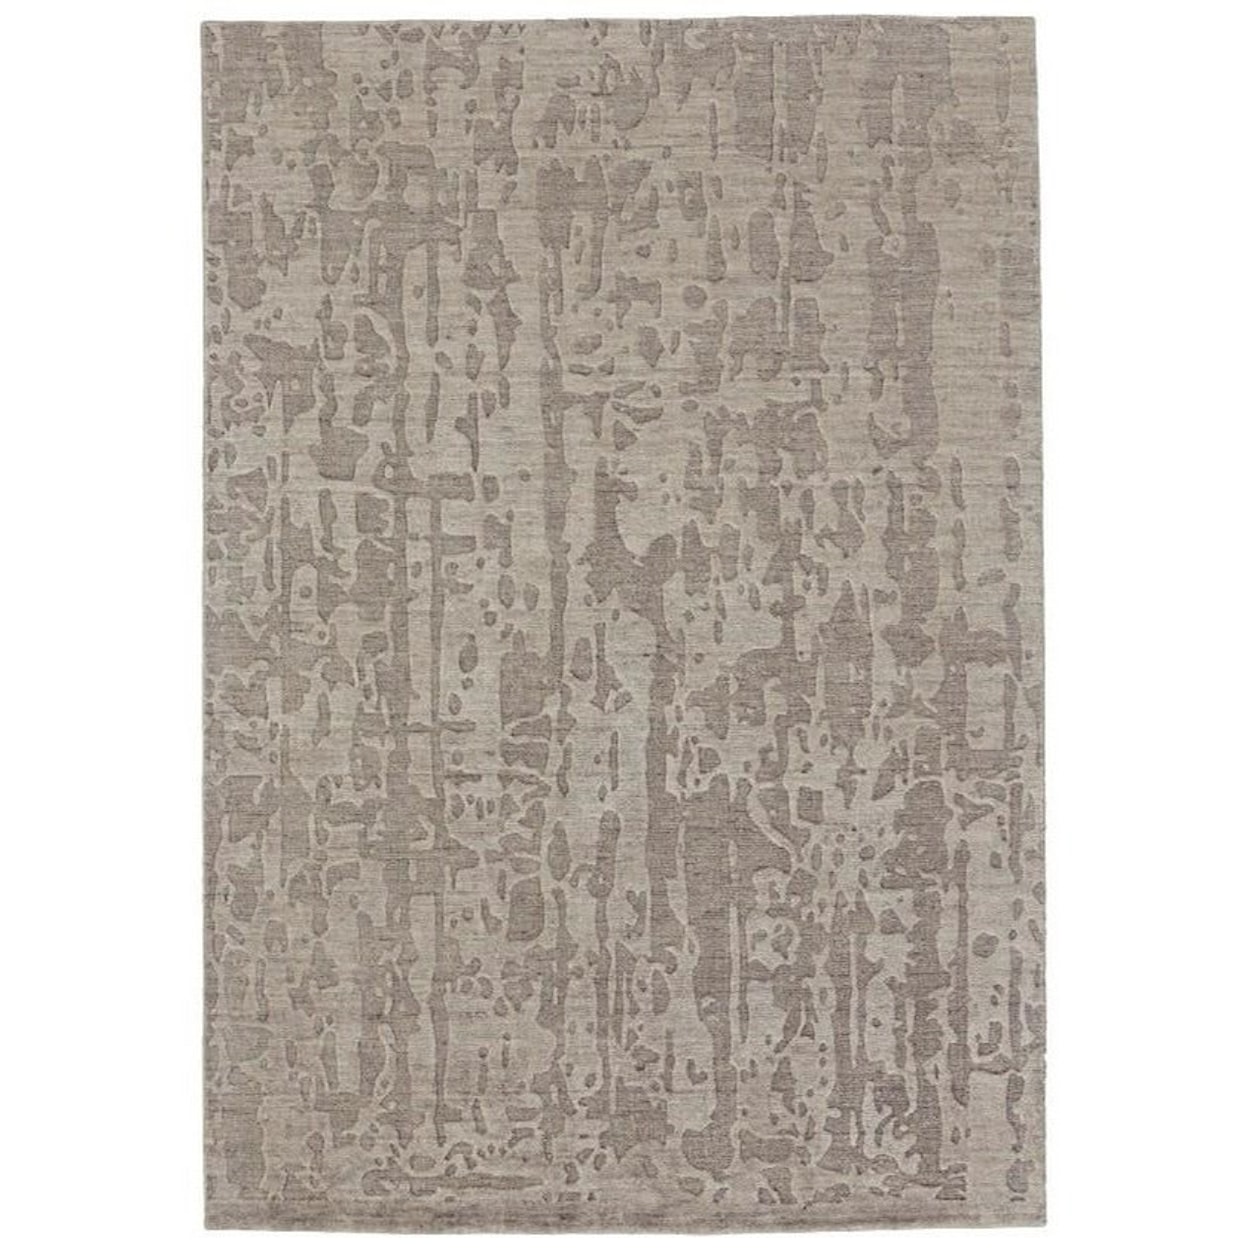 Feizy Rugs Leilani Taupe 9'-6" x 13'-6" Area Rug